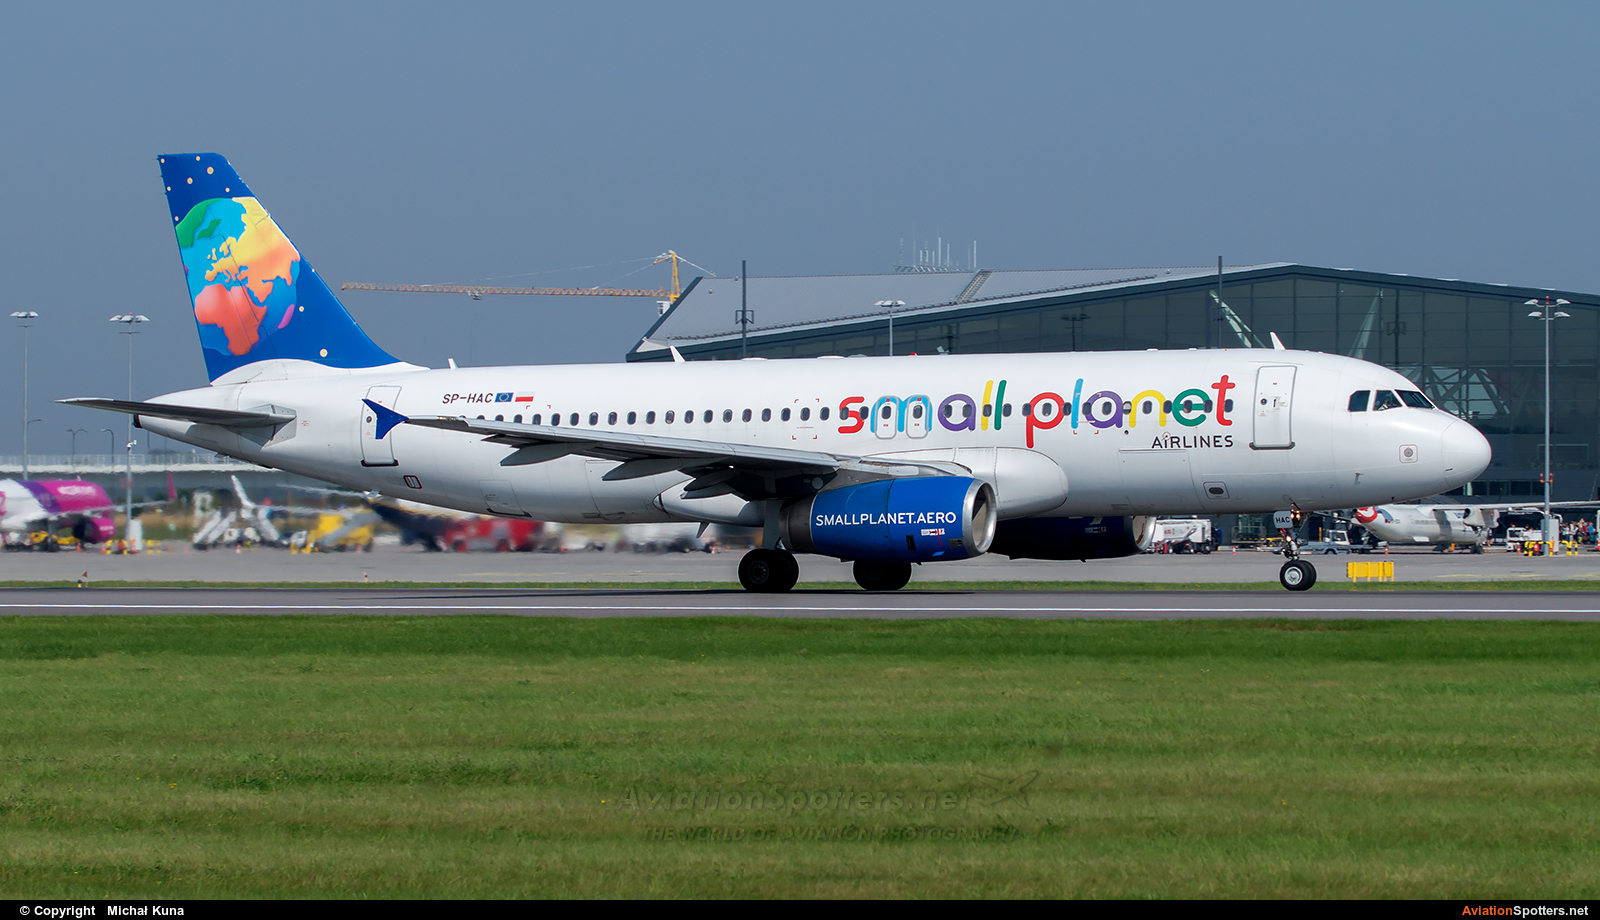 Small Planet Airlines  -  A320-233  (SP-HAC) By Michał Kuna (big)